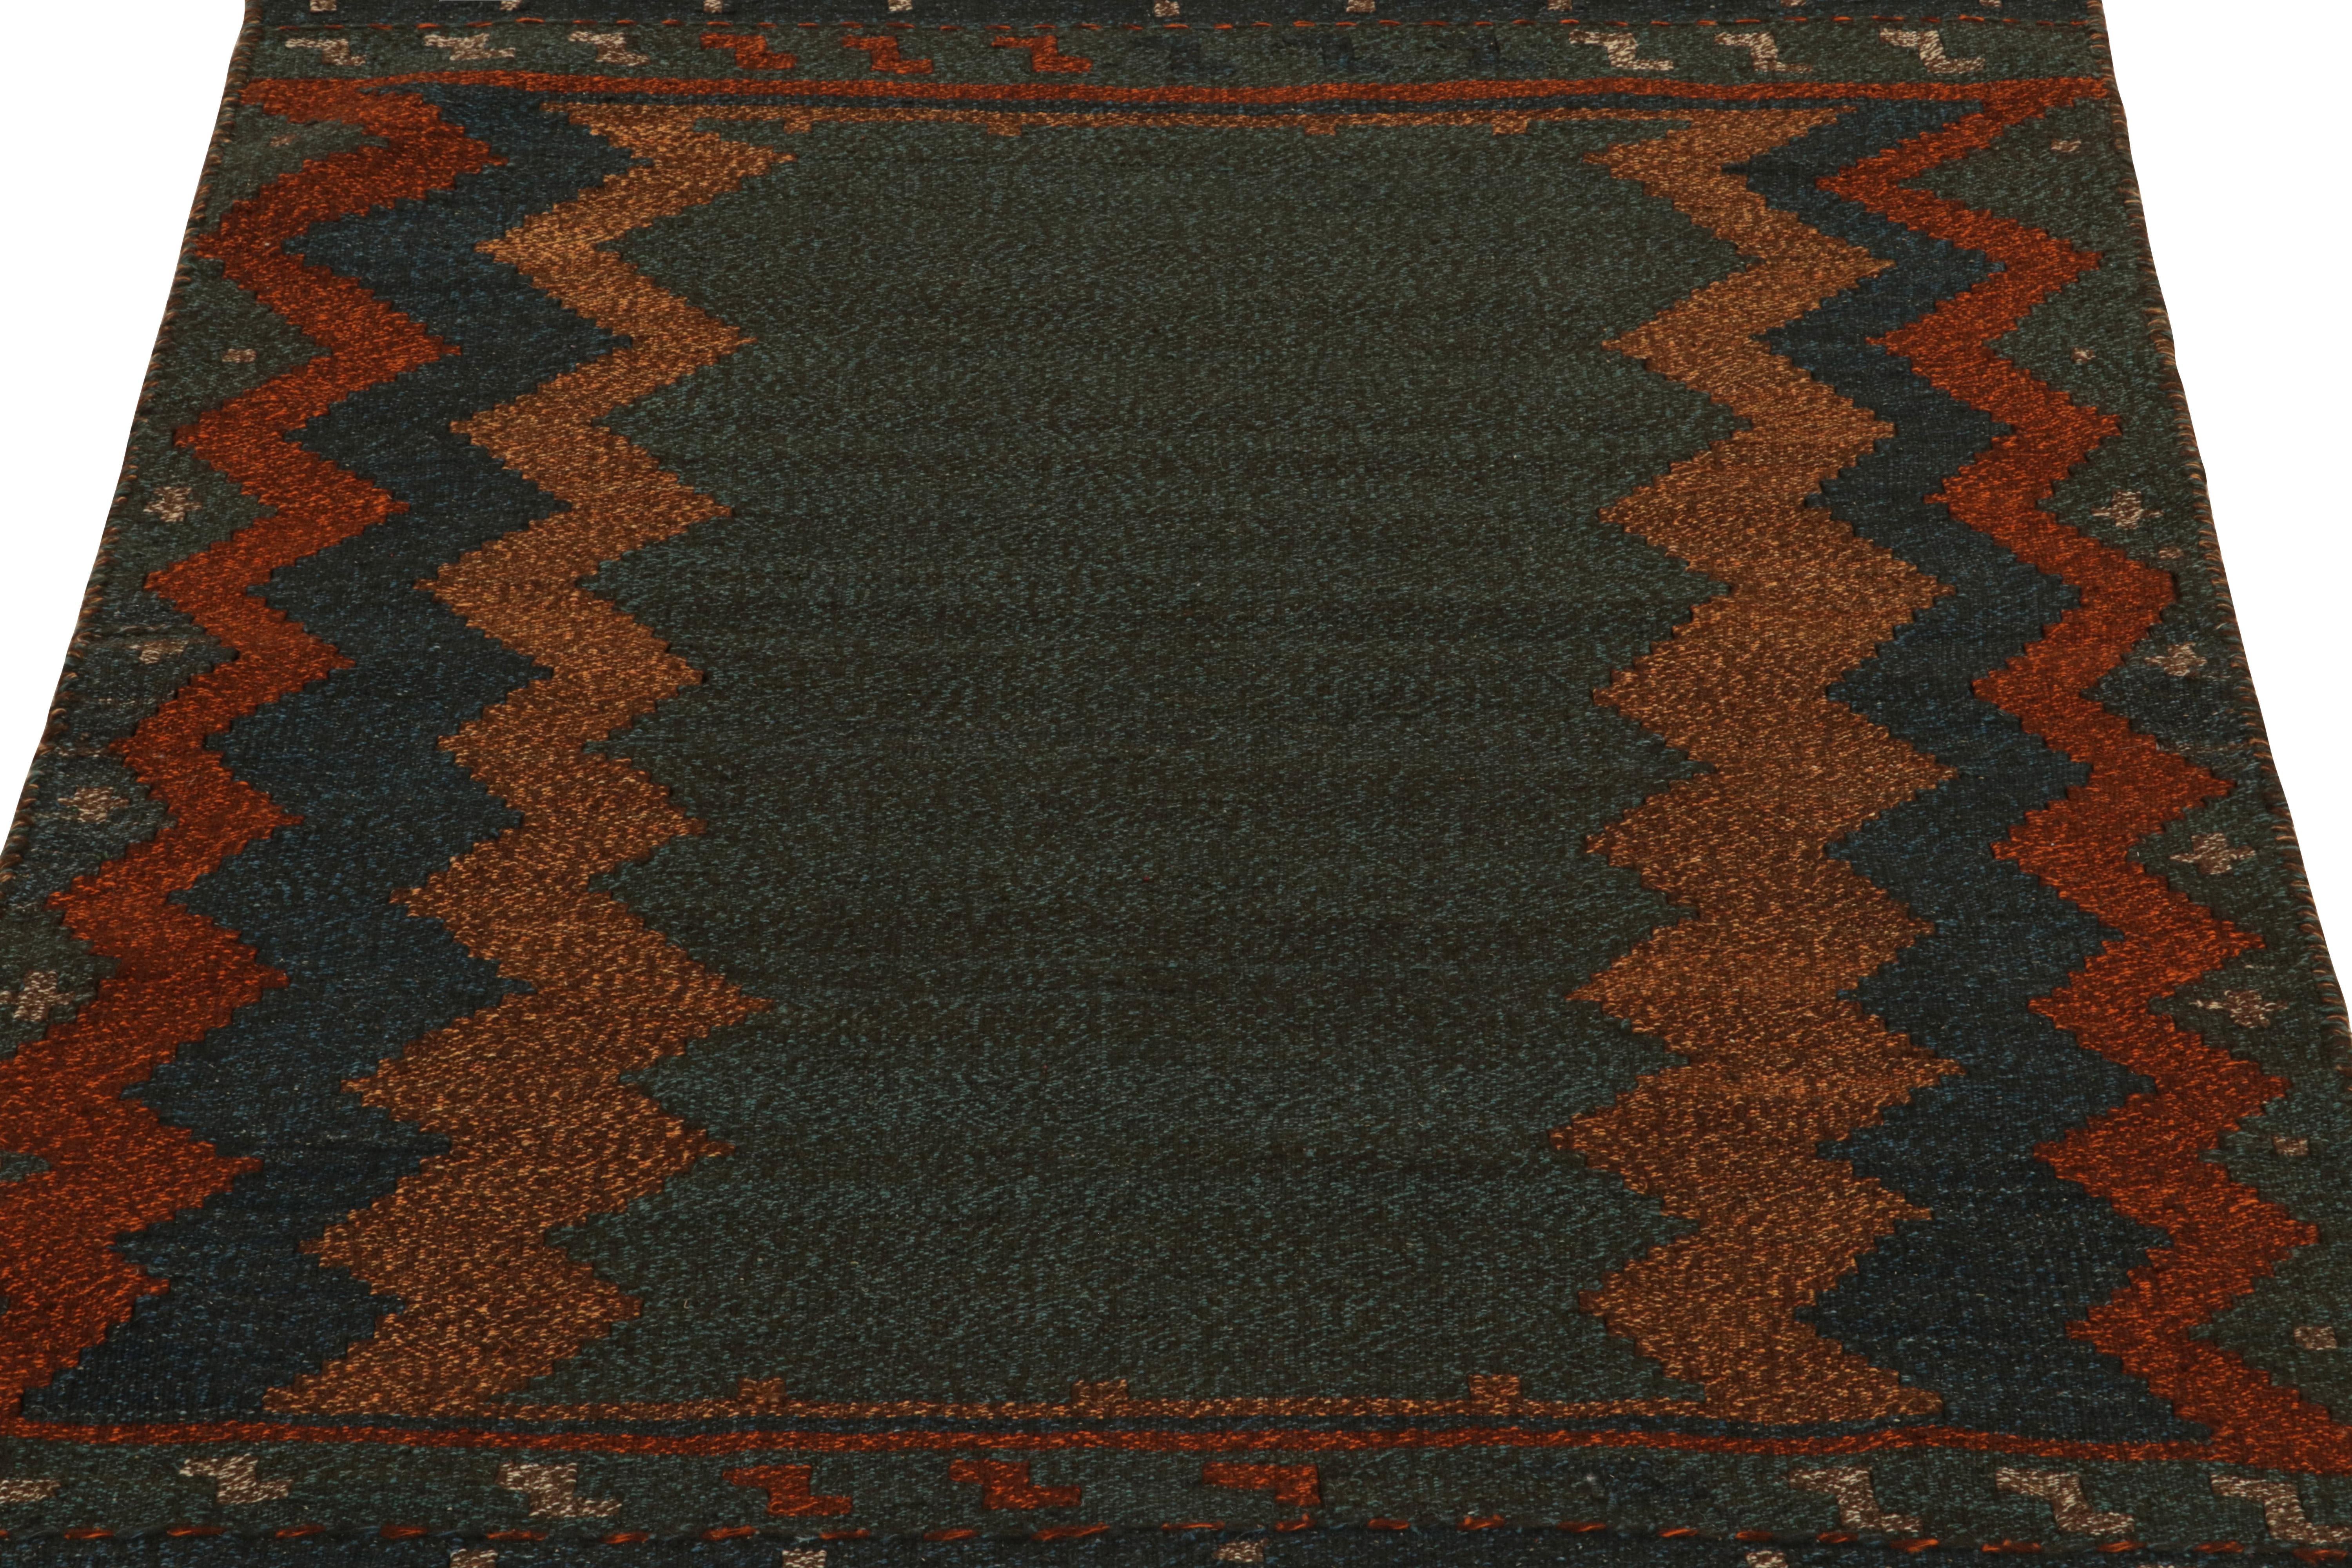 Handwoven in wool circa 1980-1990, from a rare vintage curation of small-sized Persian Sofreh Kilims now joining our collection. Distinguished for both its 3x4 size, durability, and progressive colorways among flat weaves of the period. 

The